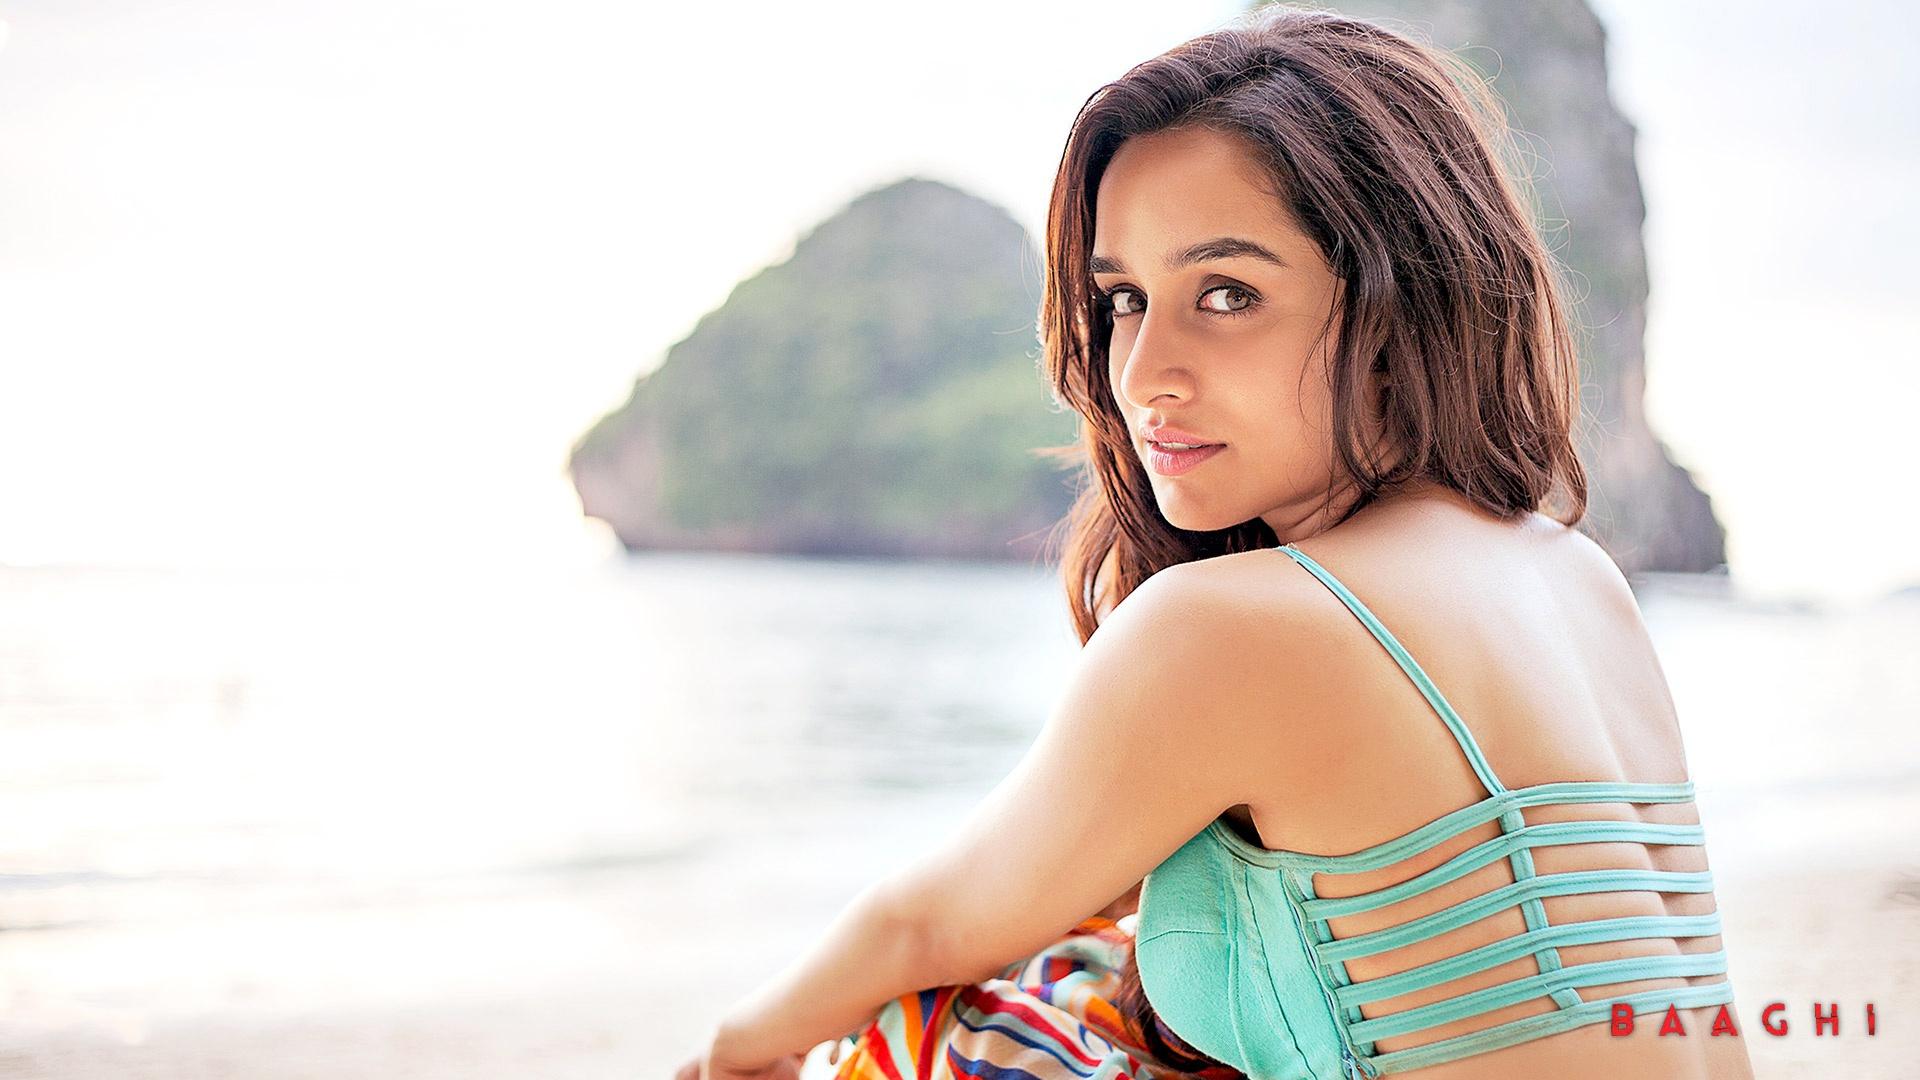 Shraddha 4K wallpaper for your desktop or mobile screen free and easy to download